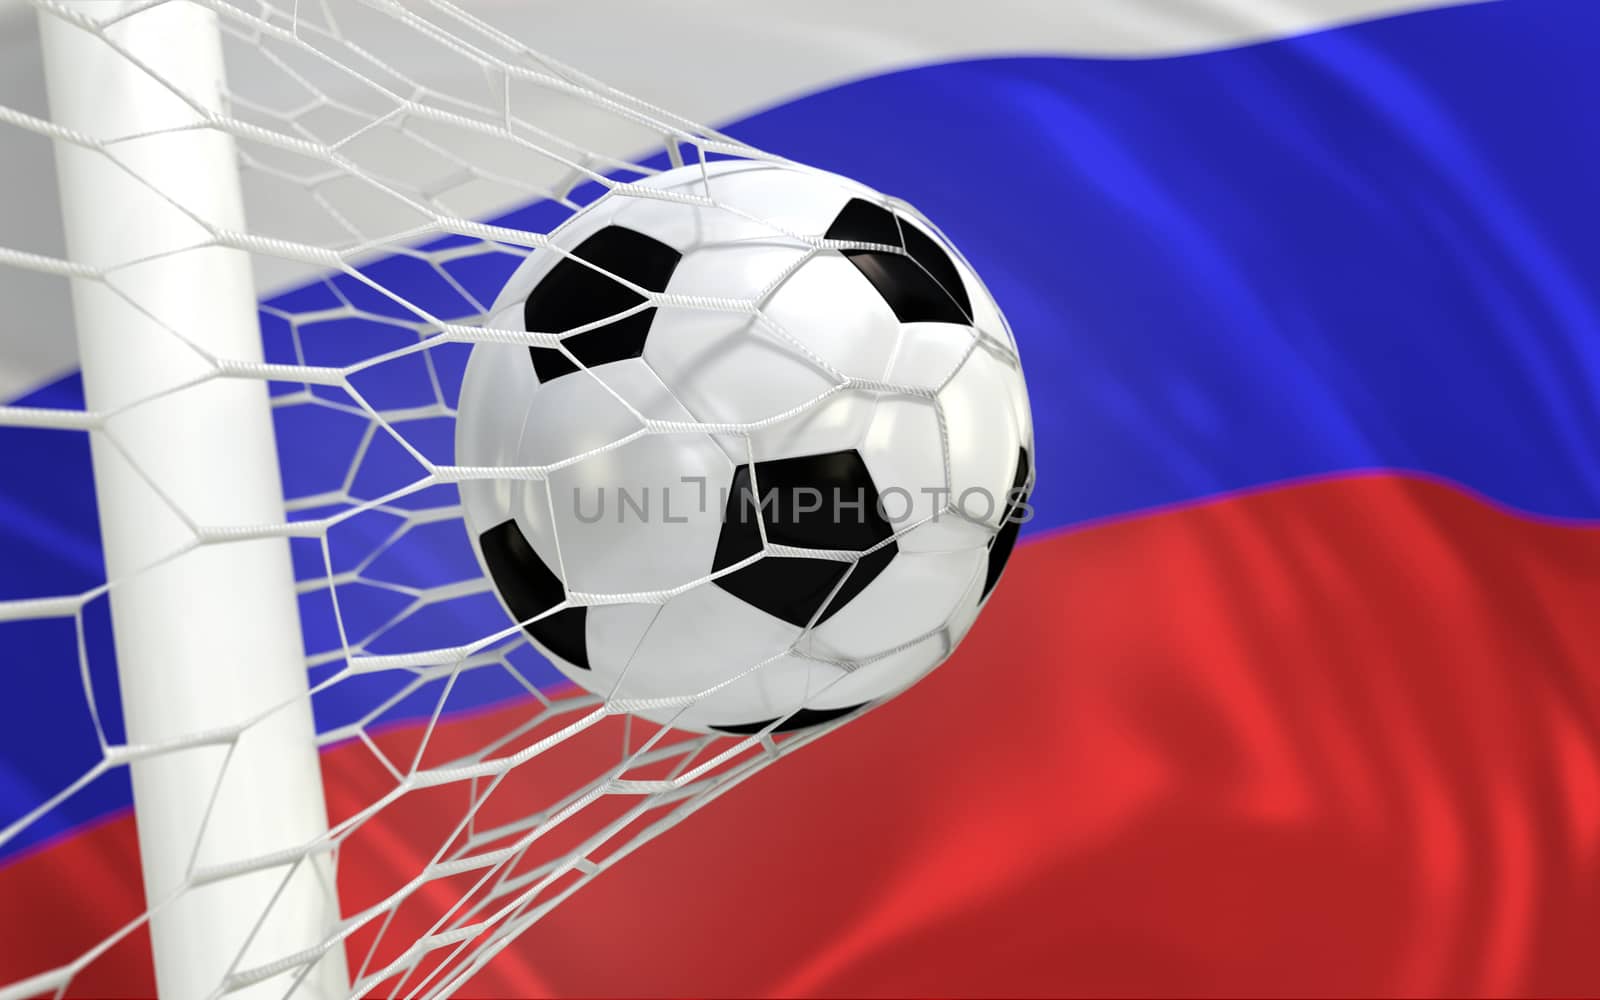 Russia waving flag and soccer ball in goal net by Barbraford